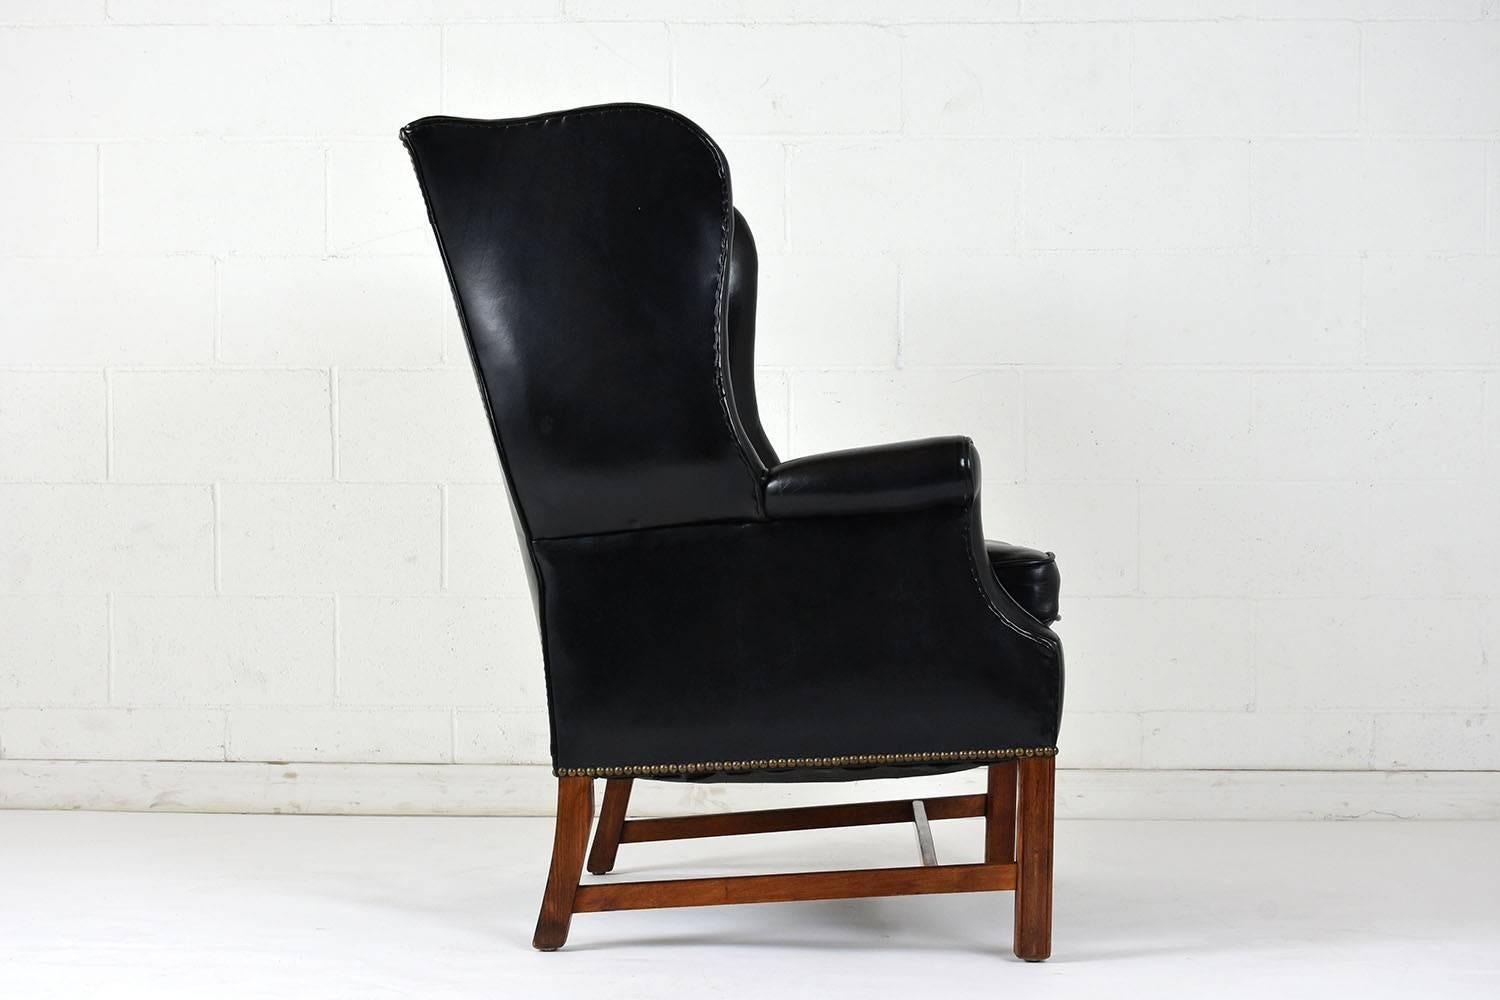 Early 20th Century English Regency-style Wingback Leather Chair 1